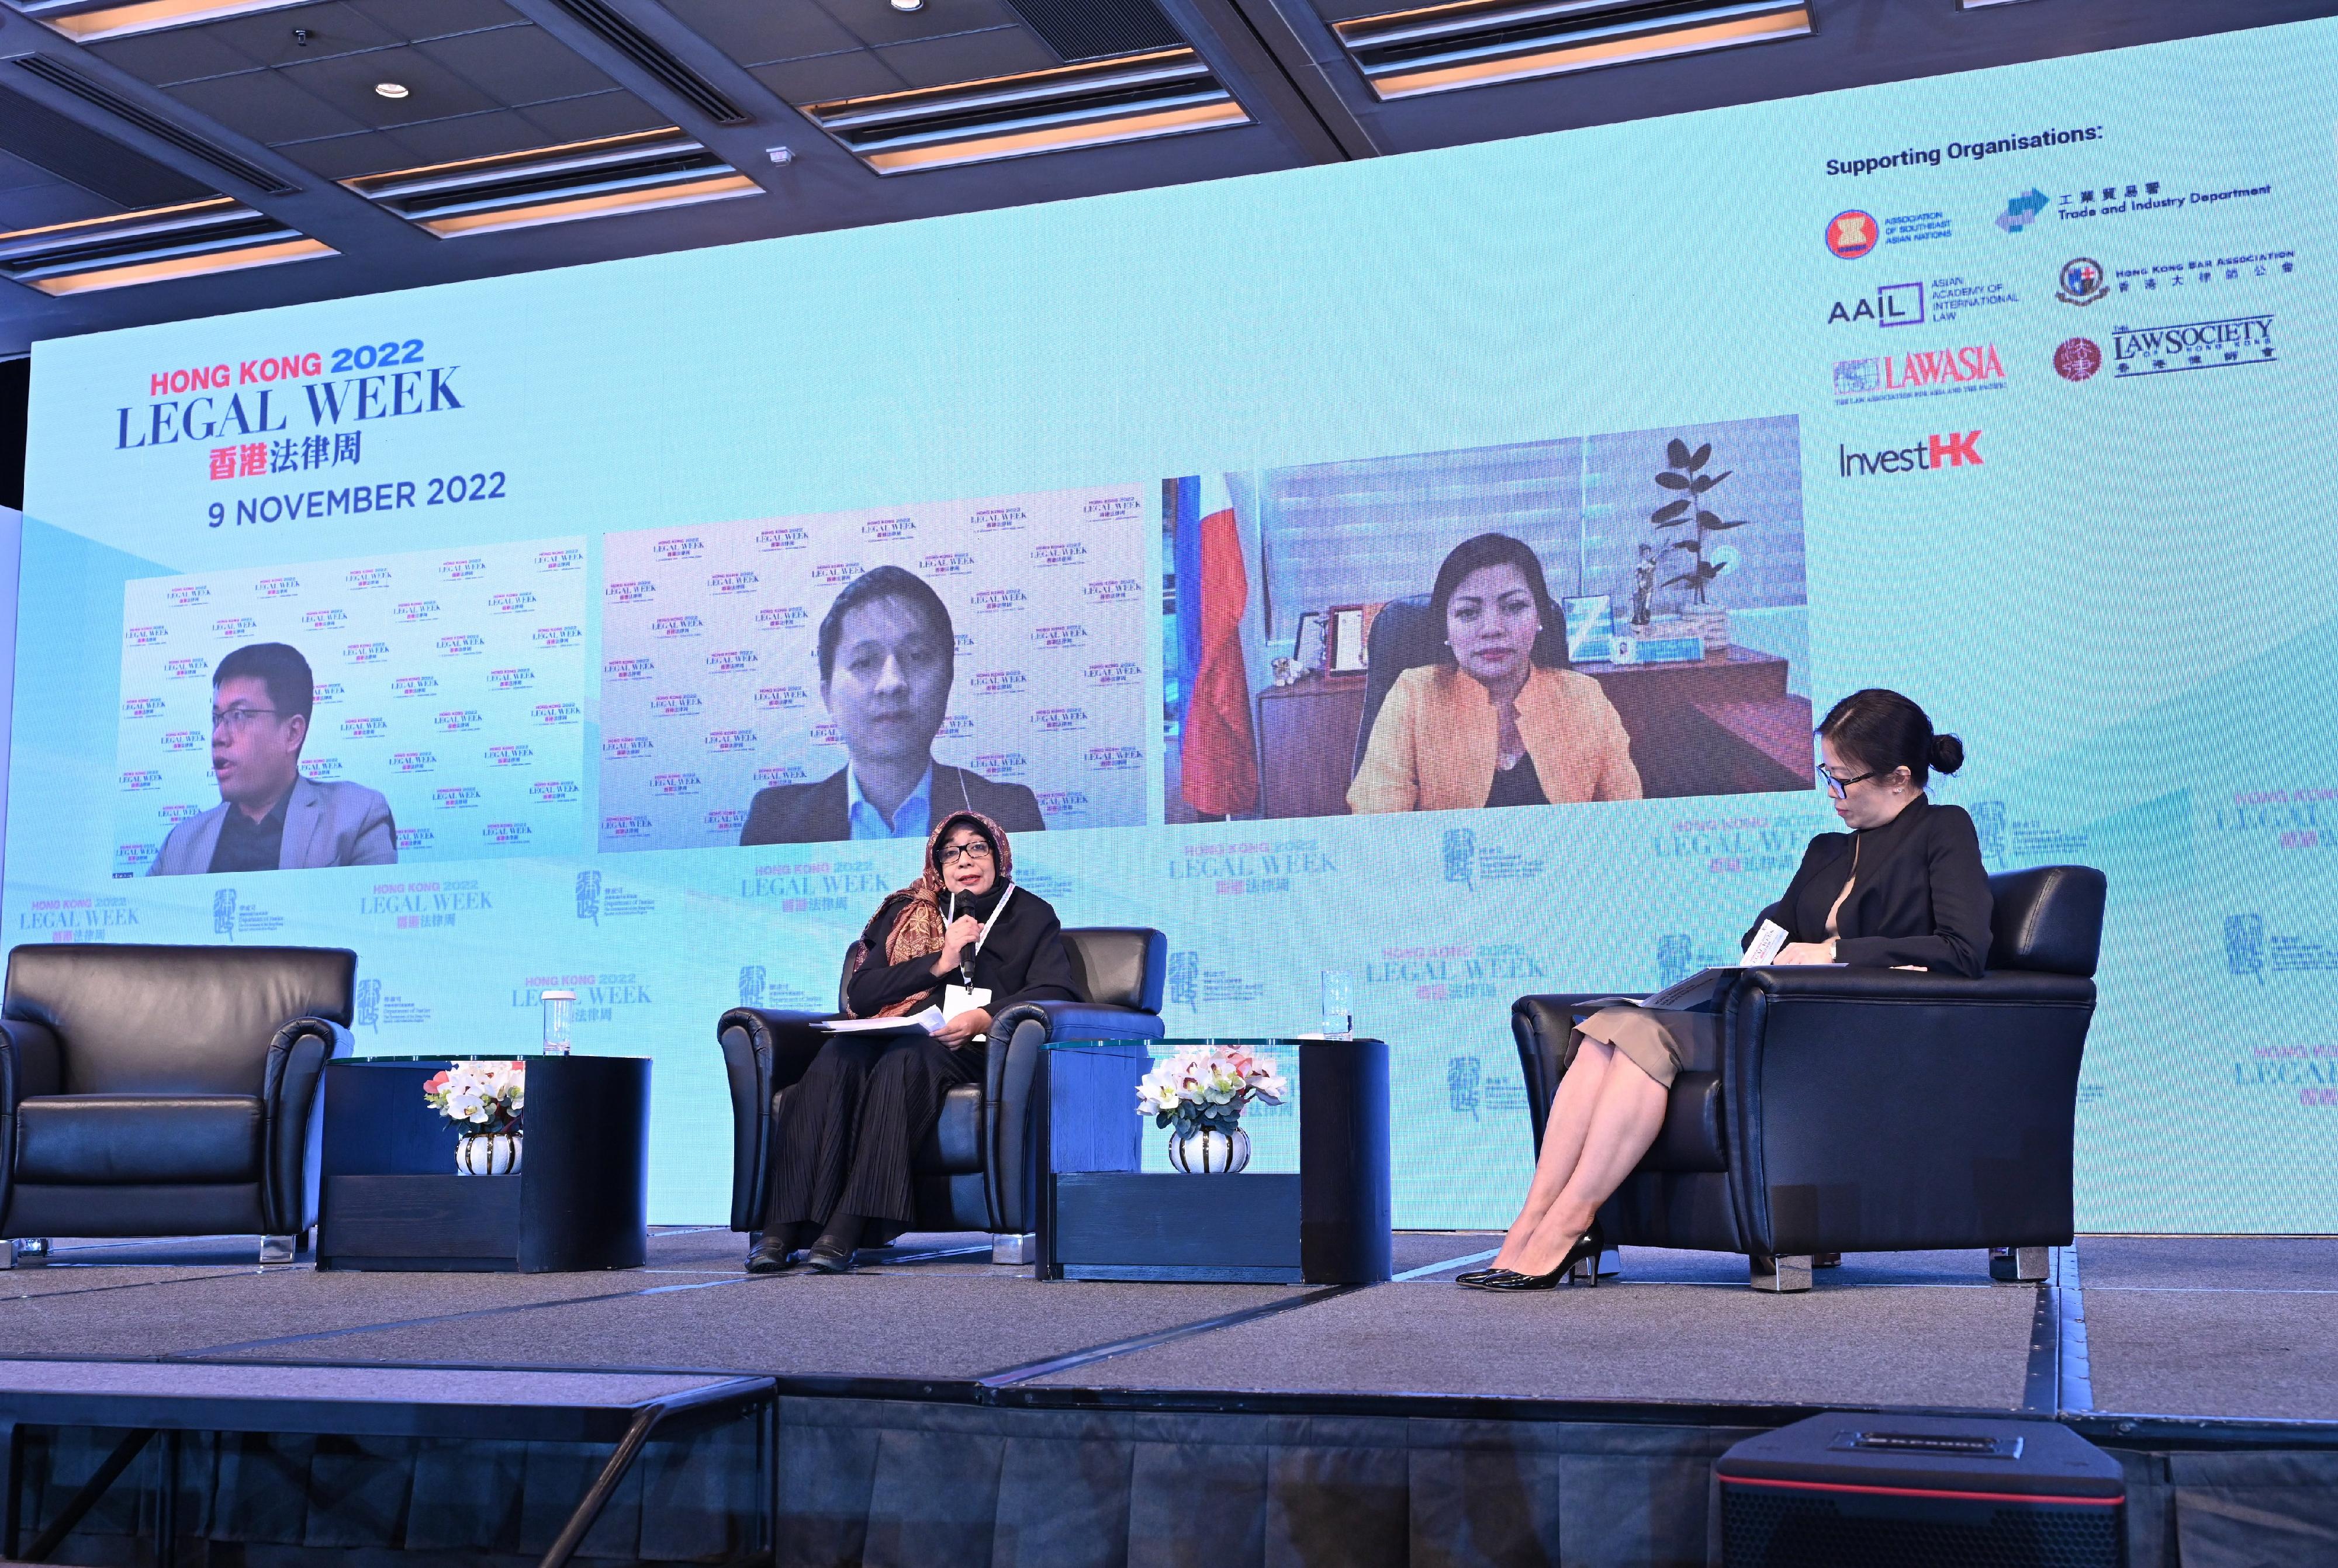 The five-day Hong Kong Legal Week 2022, an annual flagship event of the Department of Justice, continued today (November 9). Photo shows the Chief Executive Officer of the eBRAM International Online Dispute Resolution Centre, Ms Emmanuelle Ta (right); Trade Analyst of the Ministry of Trade, Indonesia, Ms Gusmalinda Sari (left); the Executive Director of the Office for Alternative Dispute Resolution, Department of Justice, the Philippines, Ms Irene D T Alogoc (right on screen); Legal Counsel of Thailand Arbitration Center Mr Visit Sriwattanapanya (centre on screen) and the Director of the Department for General Economic Issues and Integration Studies, Central Institute for Economic Management, Ministry of Planning and Investment, Vietnam, Mr Nguyen Anh Duong (left on screen) at session 3 on ASEAN Guidelines on ODR & Experience sharing from ODR Providers at the Workshop on ASEAN Online Dispute Resolution: ODR in Facilitating Cross-Border Trade and Investment for ASEAN and Hong Kong Businesses.